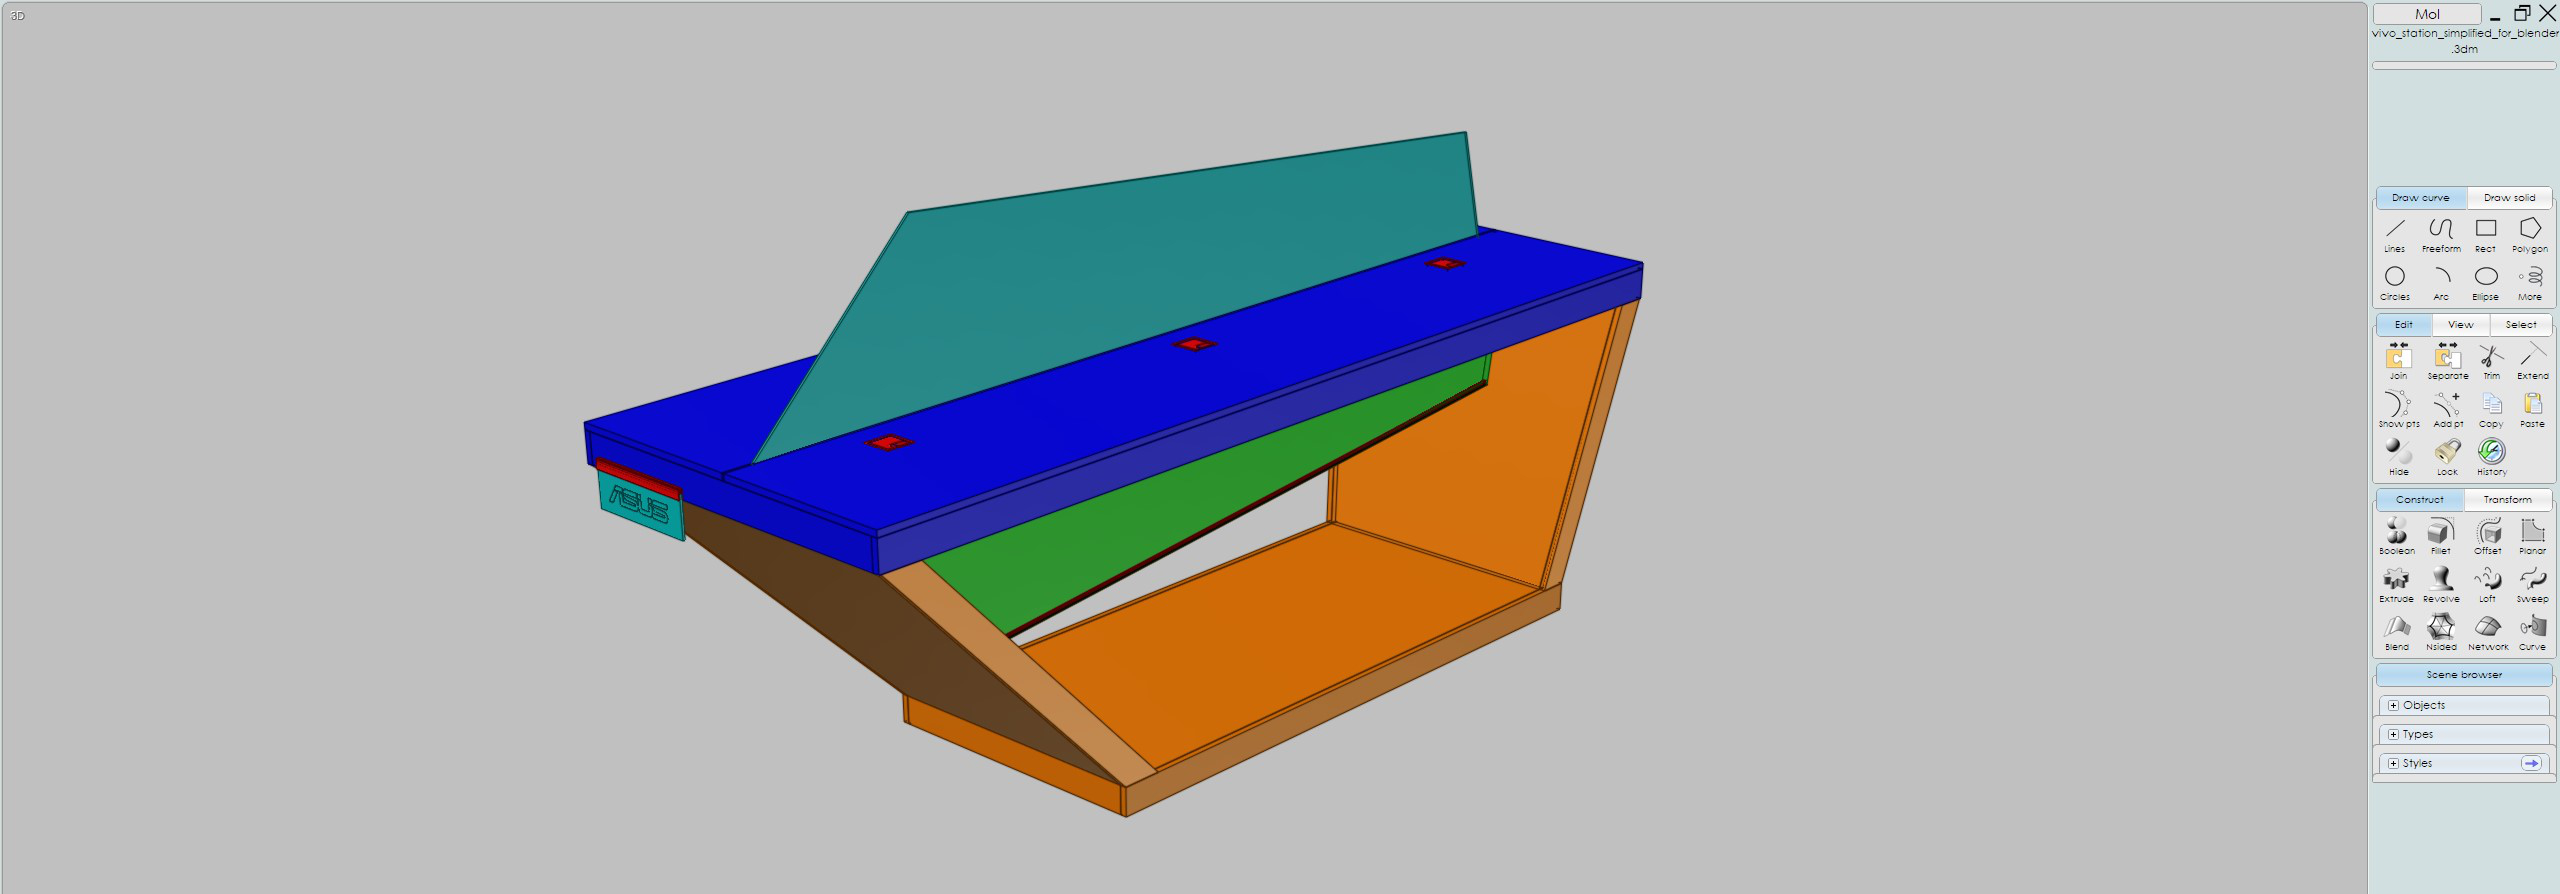 Production model in MoI3D